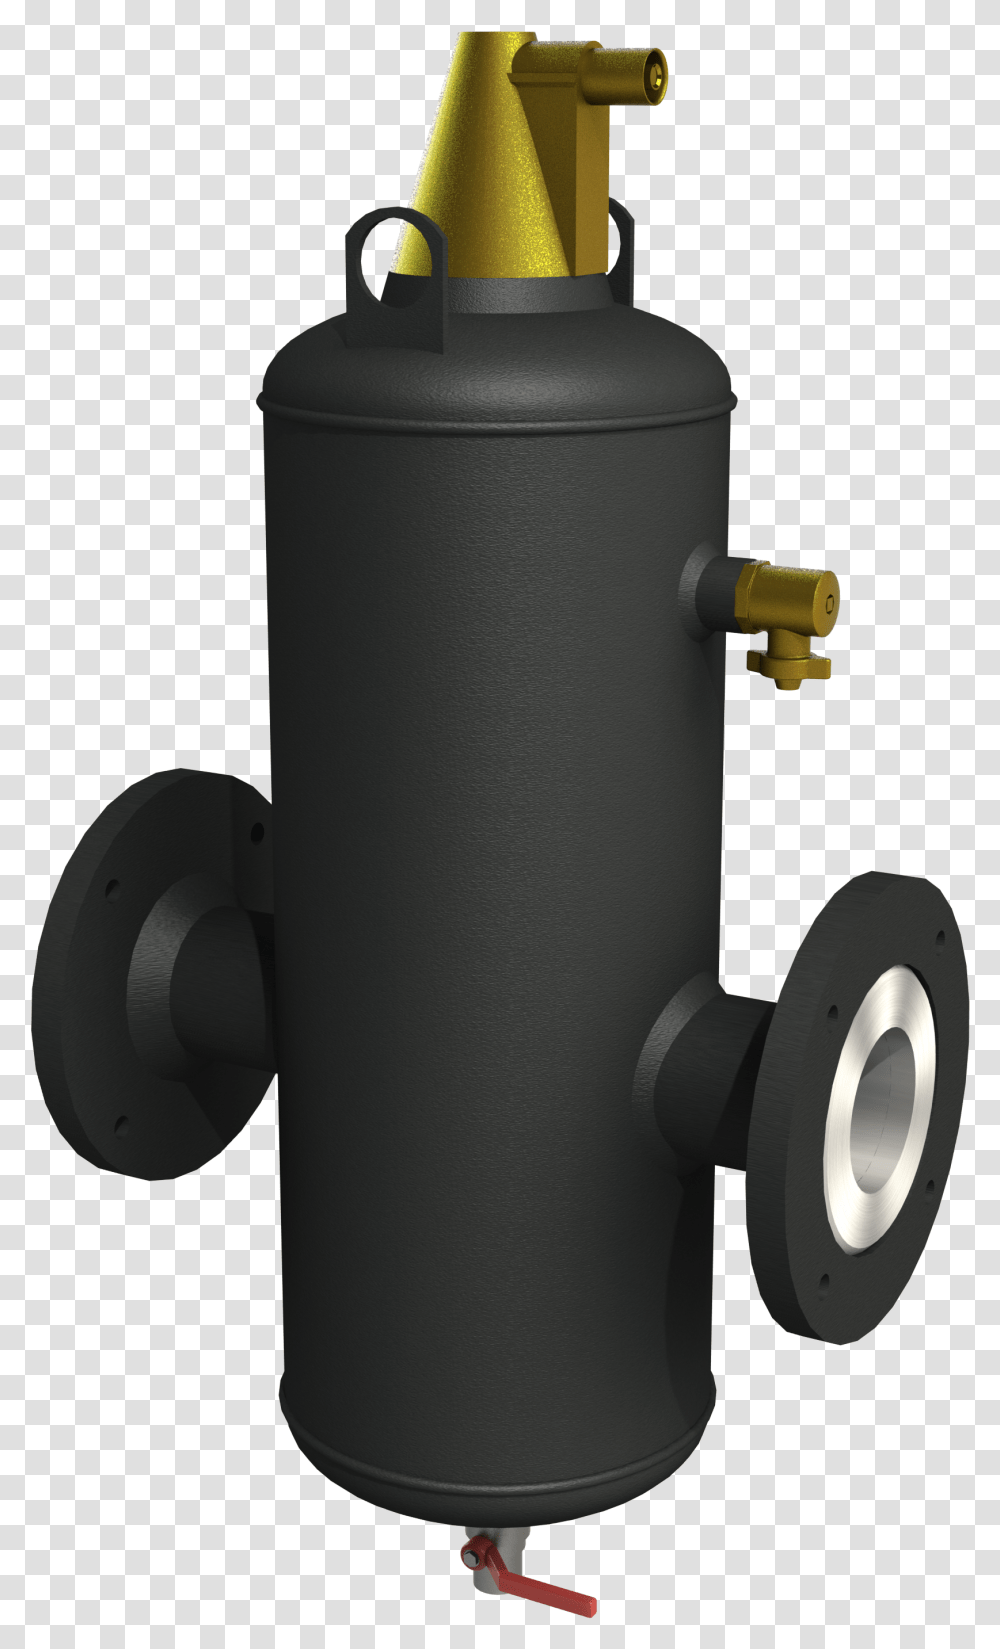 Available In Sizes From 50mm To 200mm Cylinder, Hydrant, Lamp, Machine, Fire Hydrant Transparent Png